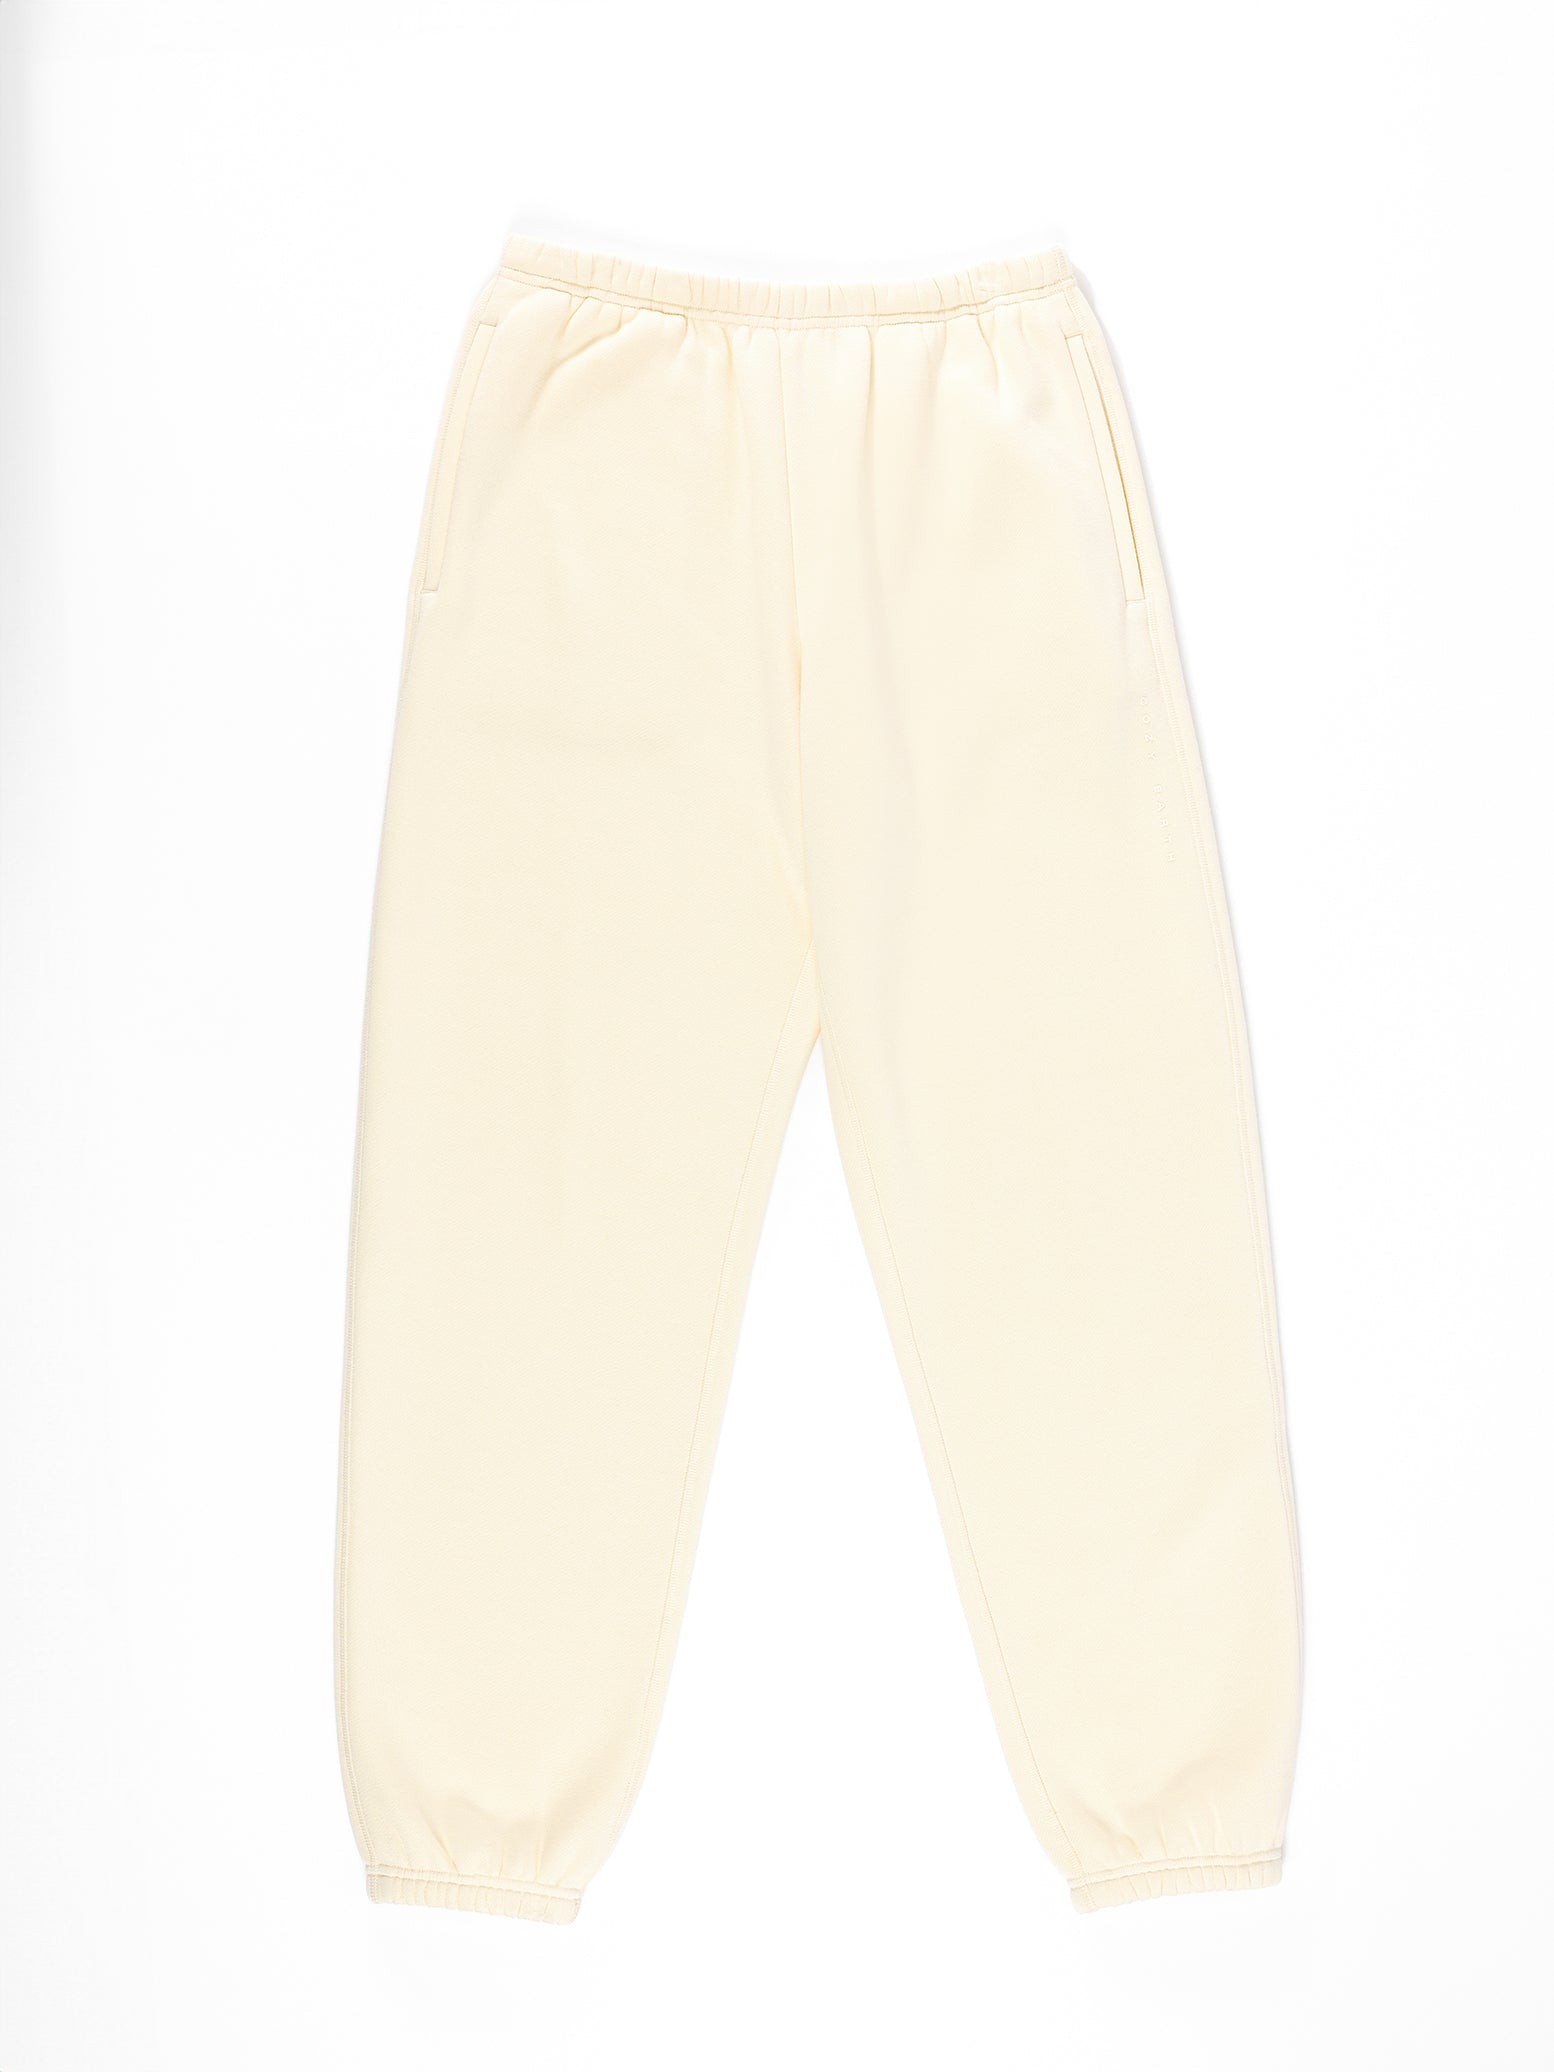 Alabaster CityScape Sweat Pant with white background 